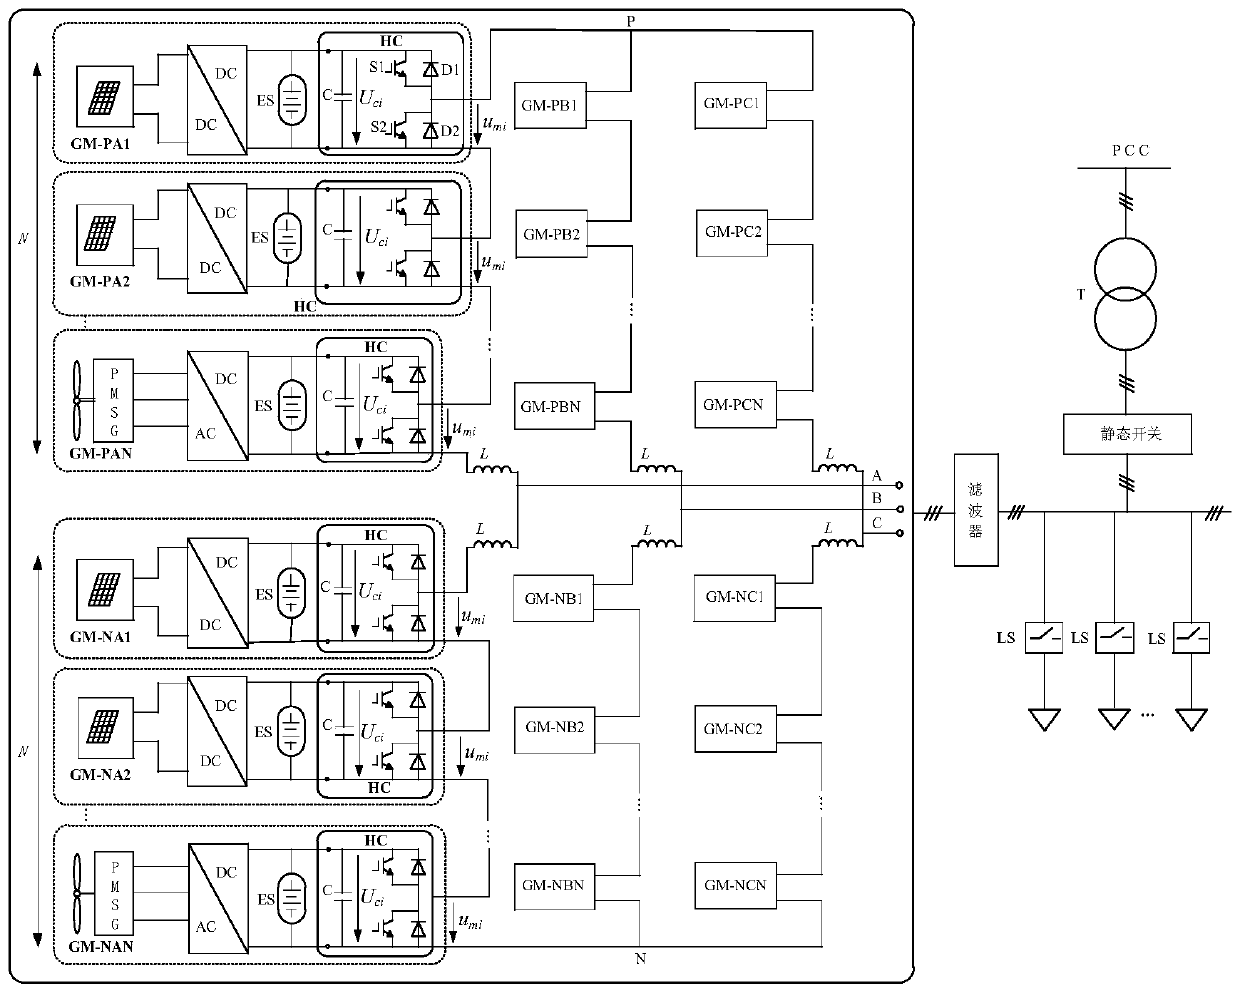 Grid-connected current control method suitable for MMC half-bridge series structure microgrid